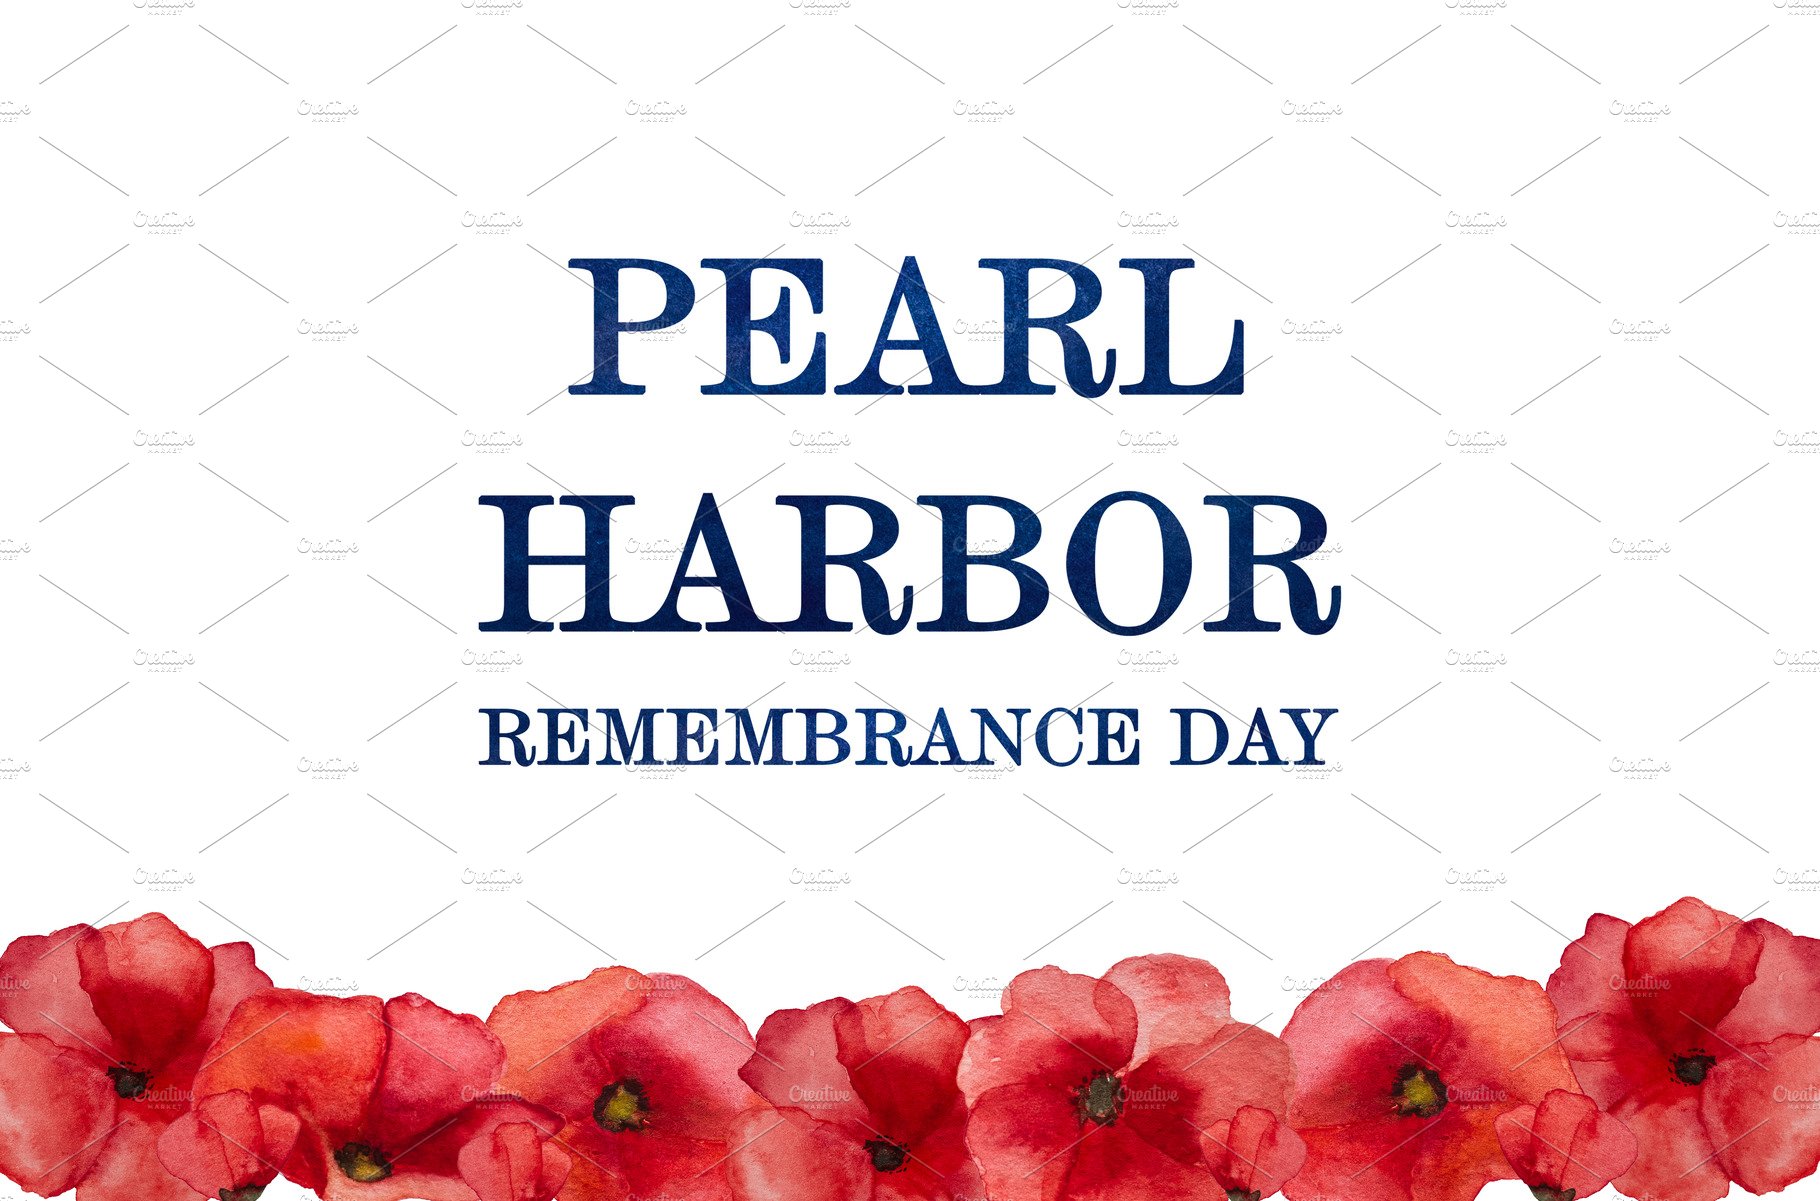 Pearl Harbor Remembrance Day. Greeting inscription. National holiday cover image.